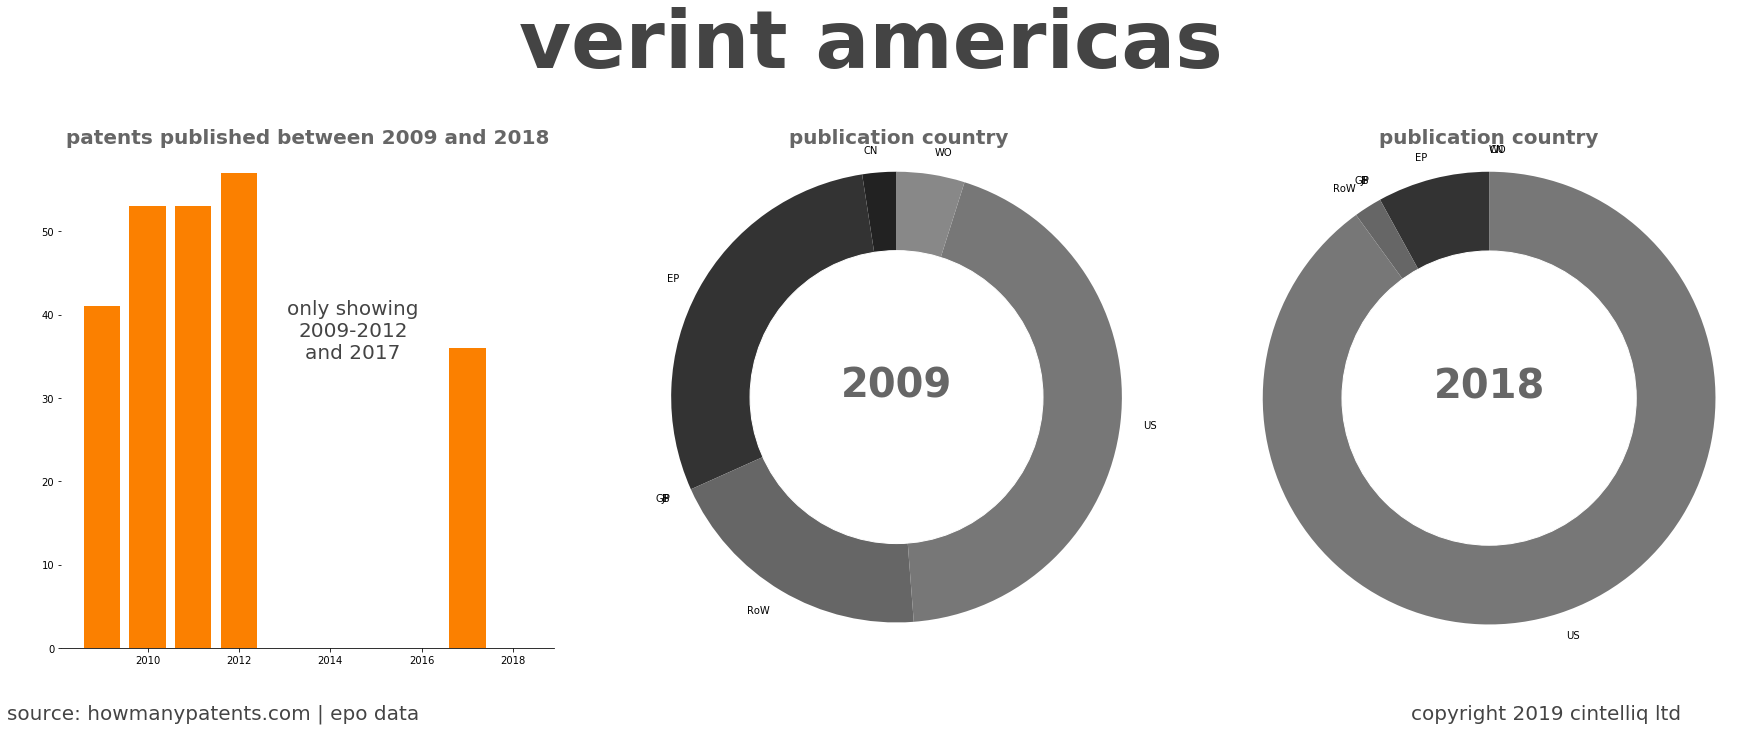 summary of patents for Verint Americas